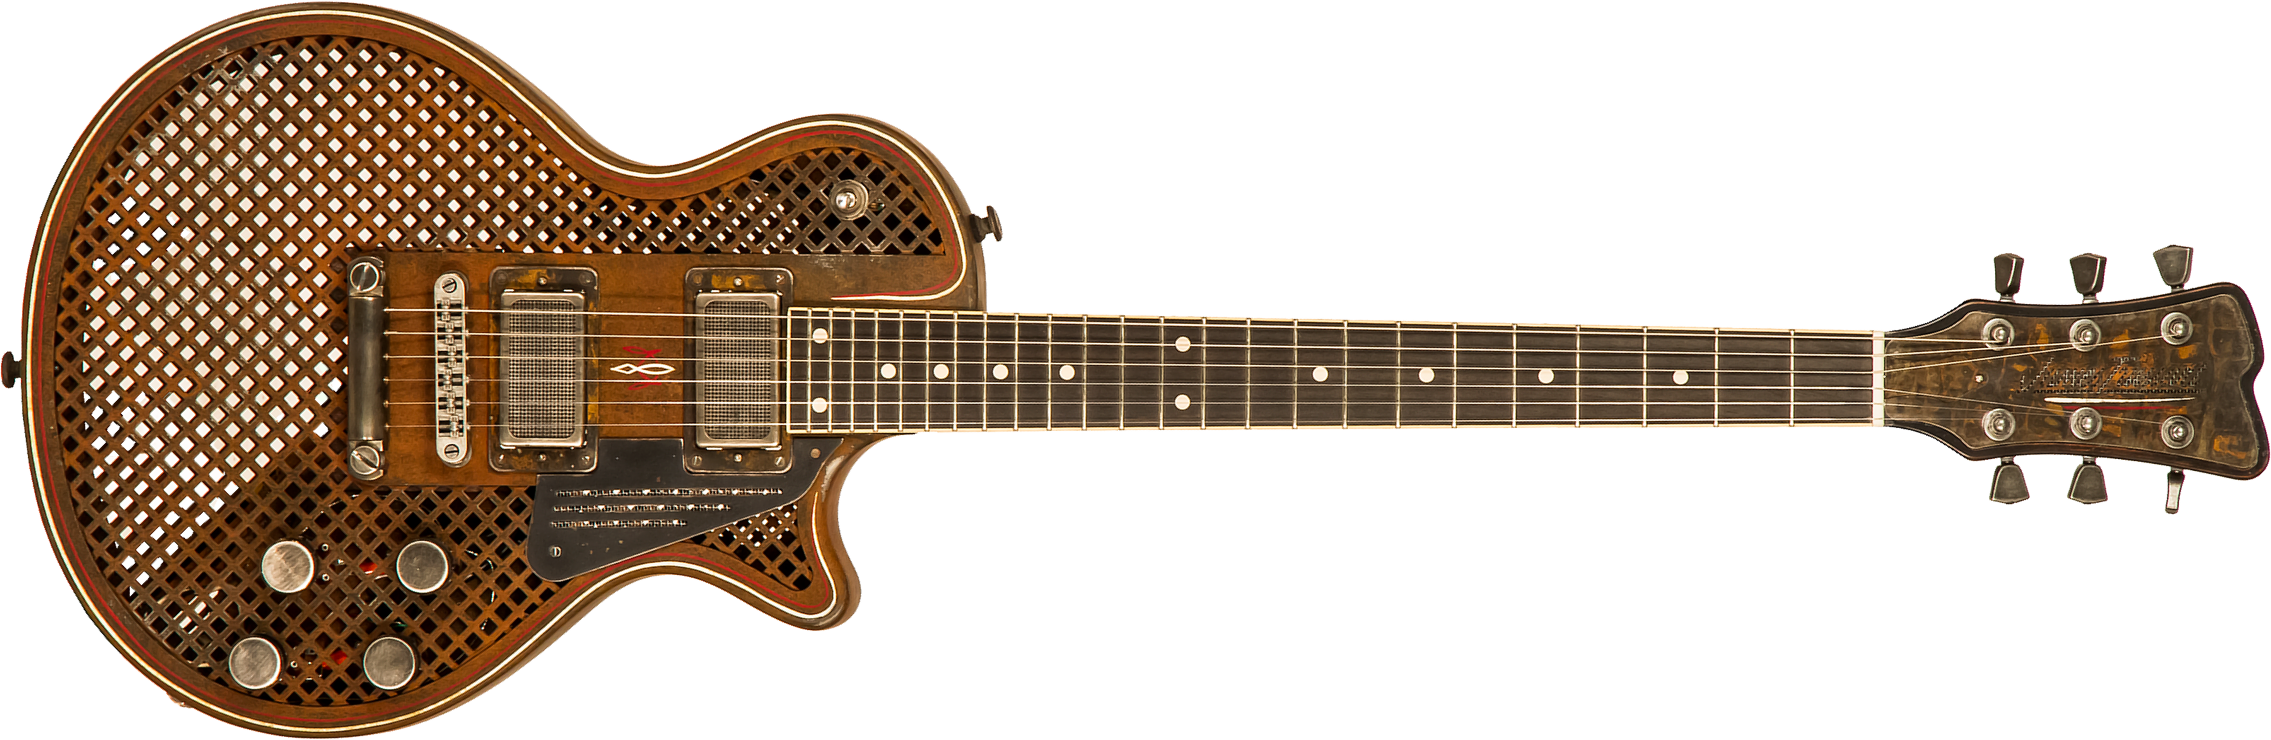 James Trussart Steeldeville Perf.front.back 2h Ht Eb #21179 - Rust O Matic Pinstriped Caged - Single cut electric guitar - Main picture